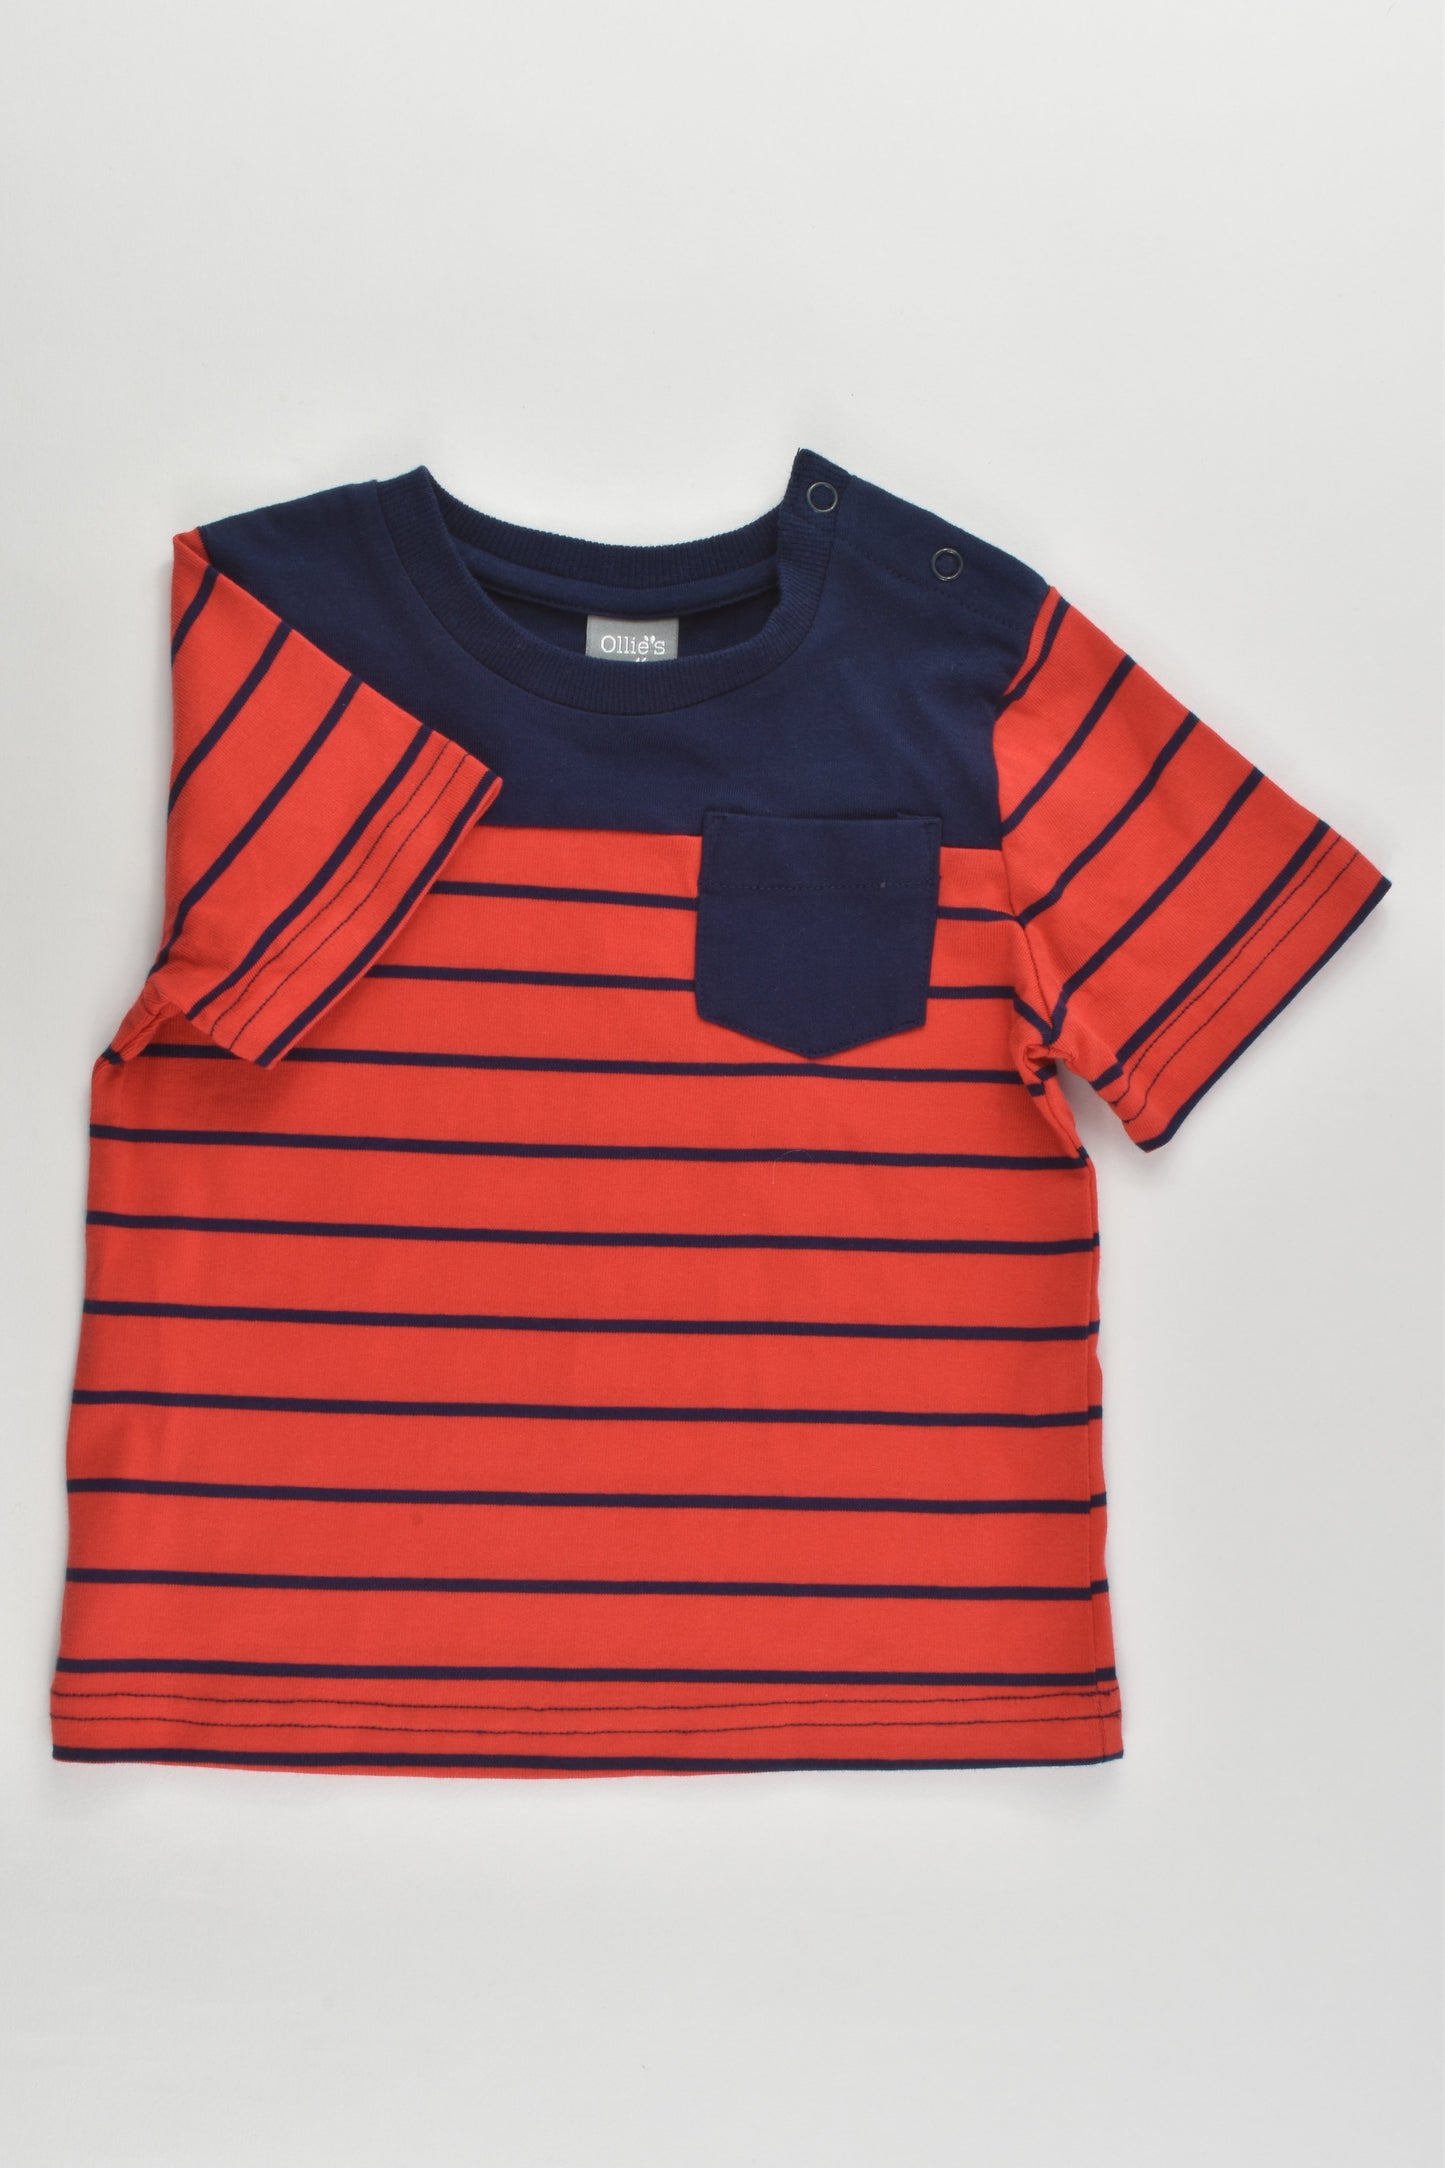 NEW Ollie's Place Size 0 Striped T-shirt